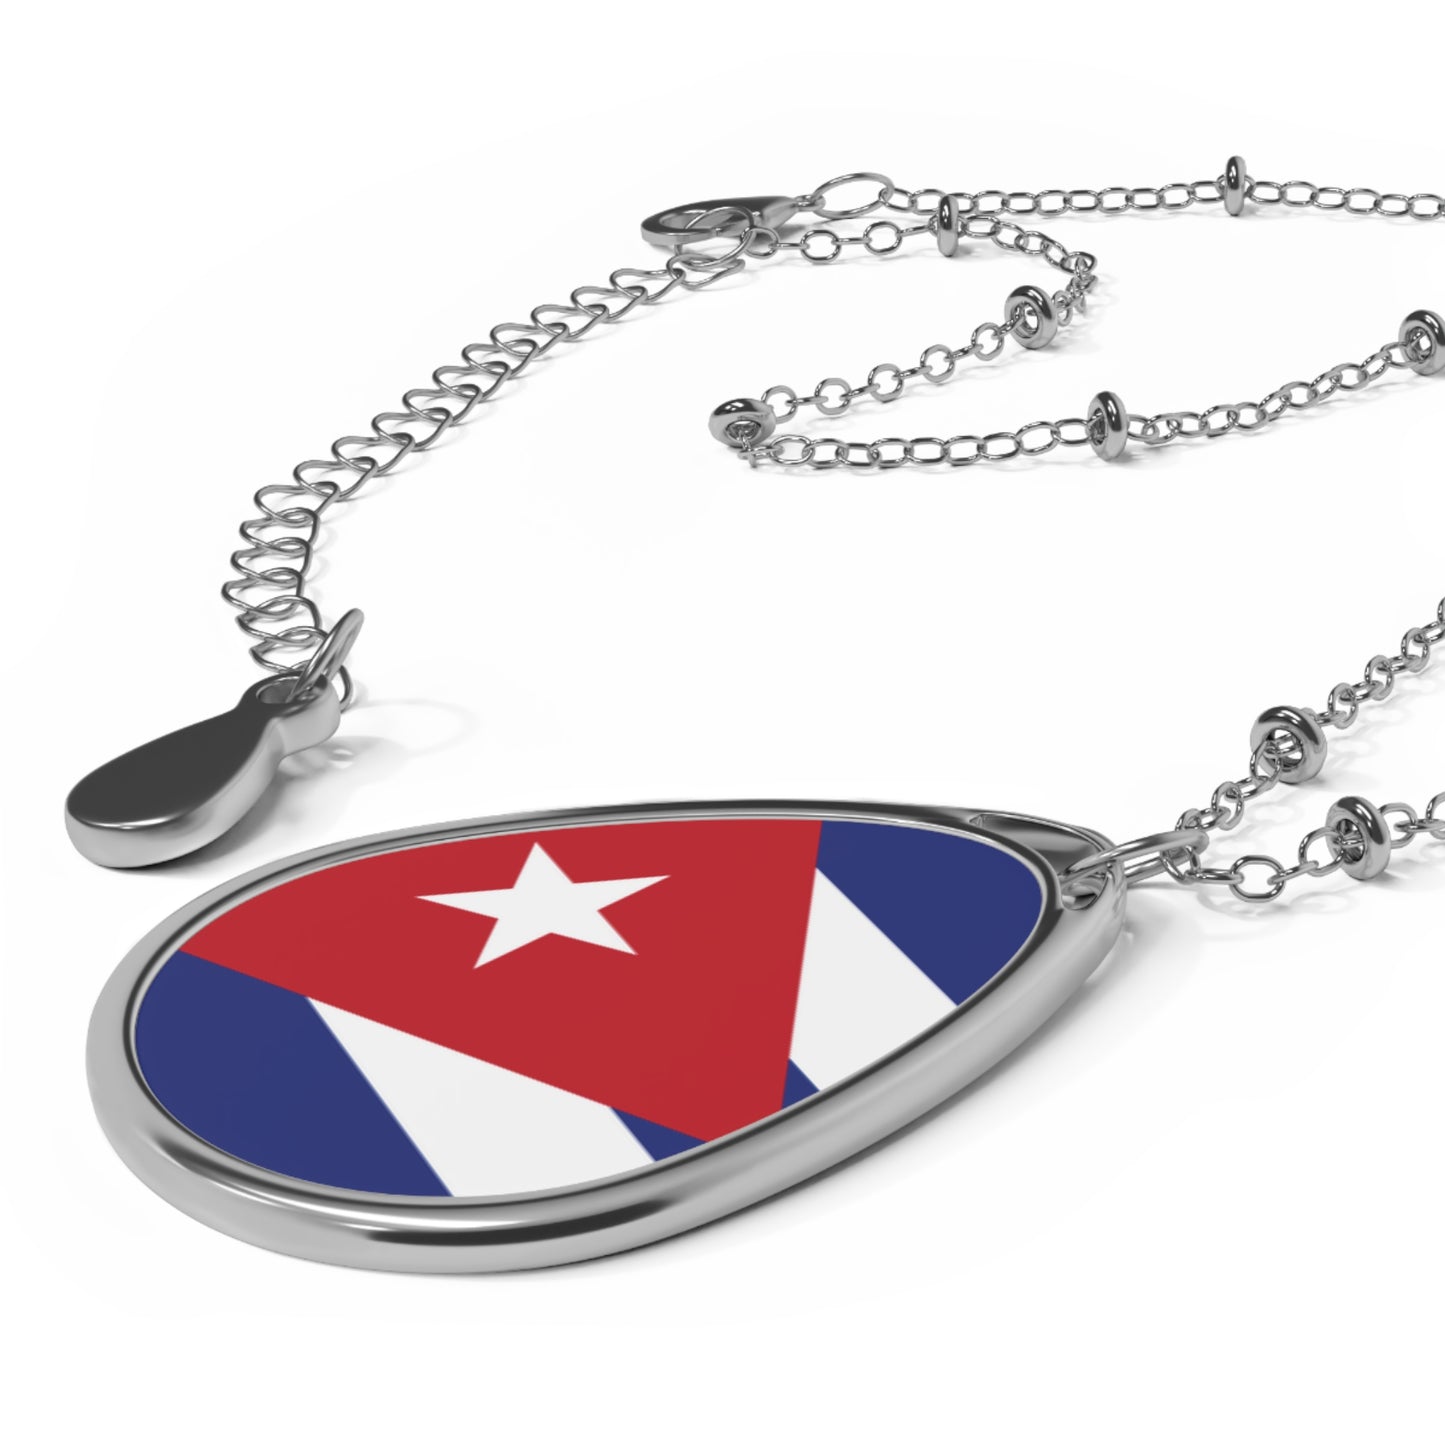 Patriotic Jewelry For Cuba Lovers